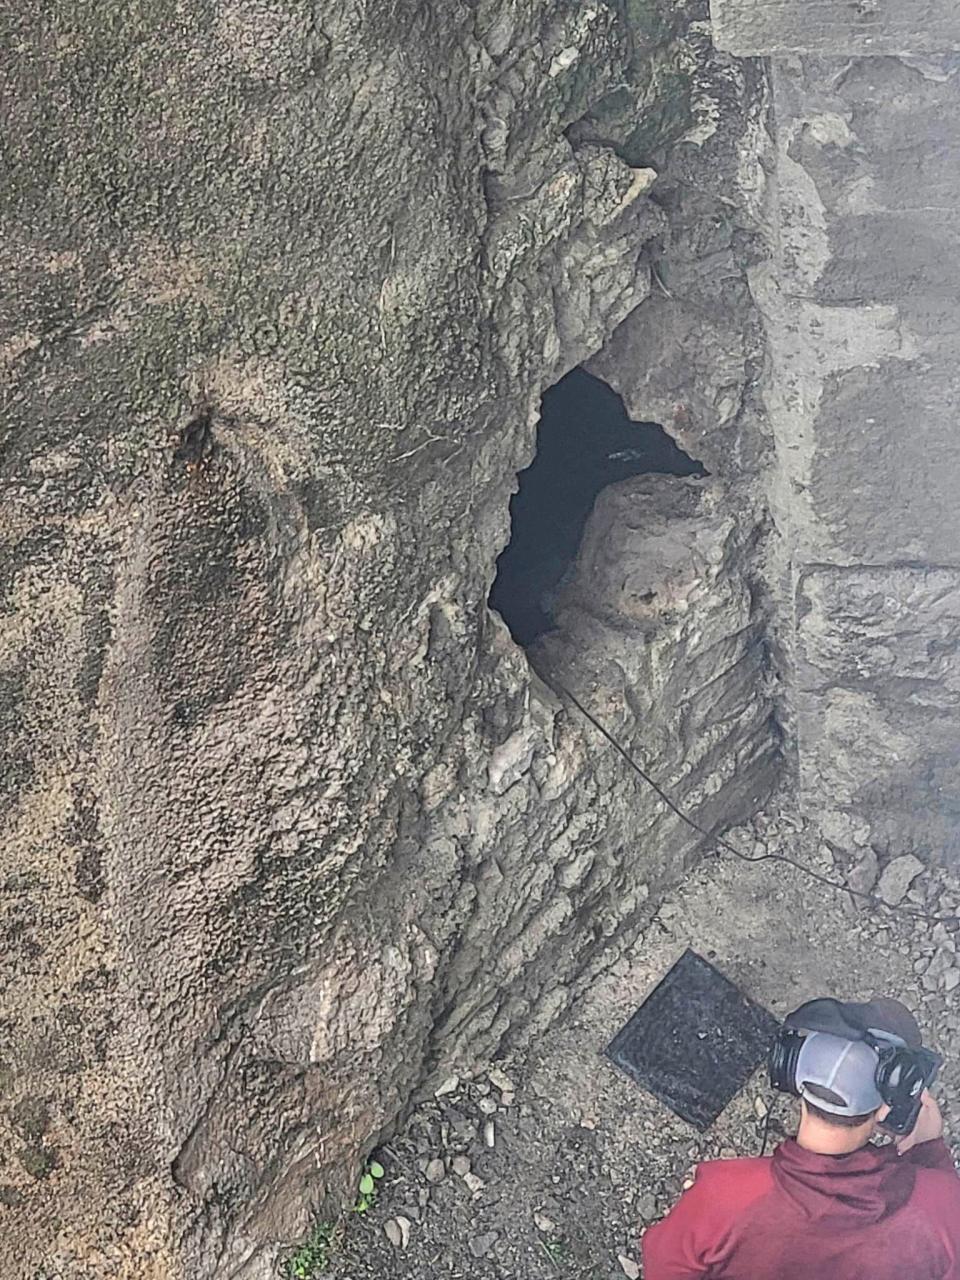 Rescue workers breach a wall with a sledgehammer on Monday before going through the hole to help rescue people stuck inside the caves in Lockport, N.Y.